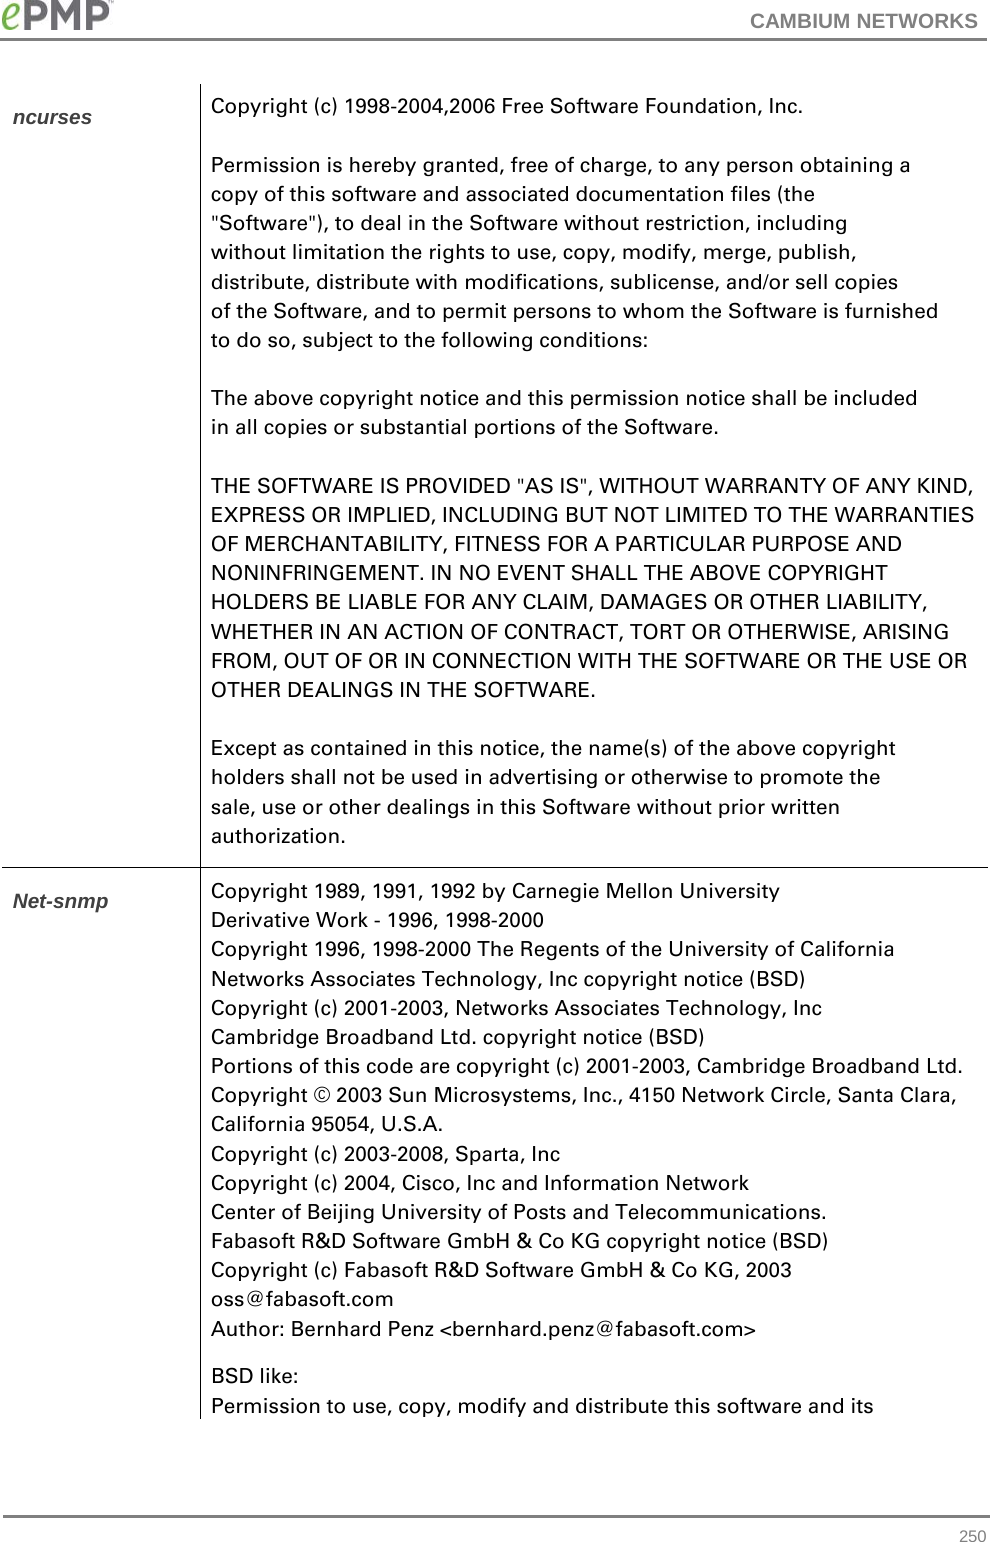 CAMBIUM NETWORKS  ncurses Copyright (c) 1998-2004,2006 Free Software Foundation, Inc.                                                                                           Permission is hereby granted, free of charge, to any person obtaining a    copy of this software and associated documentation files (the              &quot;Software&quot;), to deal in the Software without restriction, including        without limitation the rights to use, copy, modify, merge, publish,        distribute, distribute with modifications, sublicense, and/or sell copies  of the Software, and to permit persons to whom the Software is furnished   to do so, subject to the following conditions:                                                                                                        The above copyright notice and this permission notice shall be included    in all copies or substantial portions of the Software.                                                                                                THE SOFTWARE IS PROVIDED &quot;AS IS&quot;, WITHOUT WARRANTY OF ANY KIND, EXPRESS OR IMPLIED, INCLUDING BUT NOT LIMITED TO THE WARRANTIES OF MERCHANTABILITY, FITNESS FOR A PARTICULAR PURPOSE AND NONINFRINGEMENT. IN NO EVENT SHALL THE ABOVE COPYRIGHT HOLDERS BE LIABLE FOR ANY CLAIM, DAMAGES OR OTHER LIABILITY, WHETHER IN AN ACTION OF CONTRACT, TORT OR OTHERWISE, ARISING FROM, OUT OF OR IN CONNECTION WITH THE SOFTWARE OR THE USE OR OTHER DEALINGS IN THE SOFTWARE.                                                                                                                Except as contained in this notice, the name(s) of the above copyright     holders shall not be used in advertising or otherwise to promote the       sale, use or other dealings in this Software without prior written         authorization.                                                           Net-snmp Copyright 1989, 1991, 1992 by Carnegie Mellon University Derivative Work - 1996, 1998-2000 Copyright 1996, 1998-2000 The Regents of the University of California  Networks Associates Technology, Inc copyright notice (BSD)  Copyright (c) 2001-2003, Networks Associates Technology, Inc        Cambridge Broadband Ltd. copyright notice (BSD)  Portions of this code are copyright (c) 2001-2003, Cambridge Broadband Ltd.  Copyright © 2003 Sun Microsystems, Inc., 4150 Network Circle, Santa Clara, California 95054, U.S.A.  Copyright (c) 2003-2008, Sparta, Inc   Copyright (c) 2004, Cisco, Inc and Information Network Center of Beijing University of Posts and Telecommunications.  Fabasoft R&amp;D Software GmbH &amp; Co KG copyright notice (BSD)  Copyright (c) Fabasoft R&amp;D Software GmbH &amp; Co KG, 2003 oss@fabasoft.com Author: Bernhard Penz &lt;bernhard.penz@fabasoft.com&gt; BSD like:                                                                                                                     Permission to use, copy, modify and distribute this software and its  250 